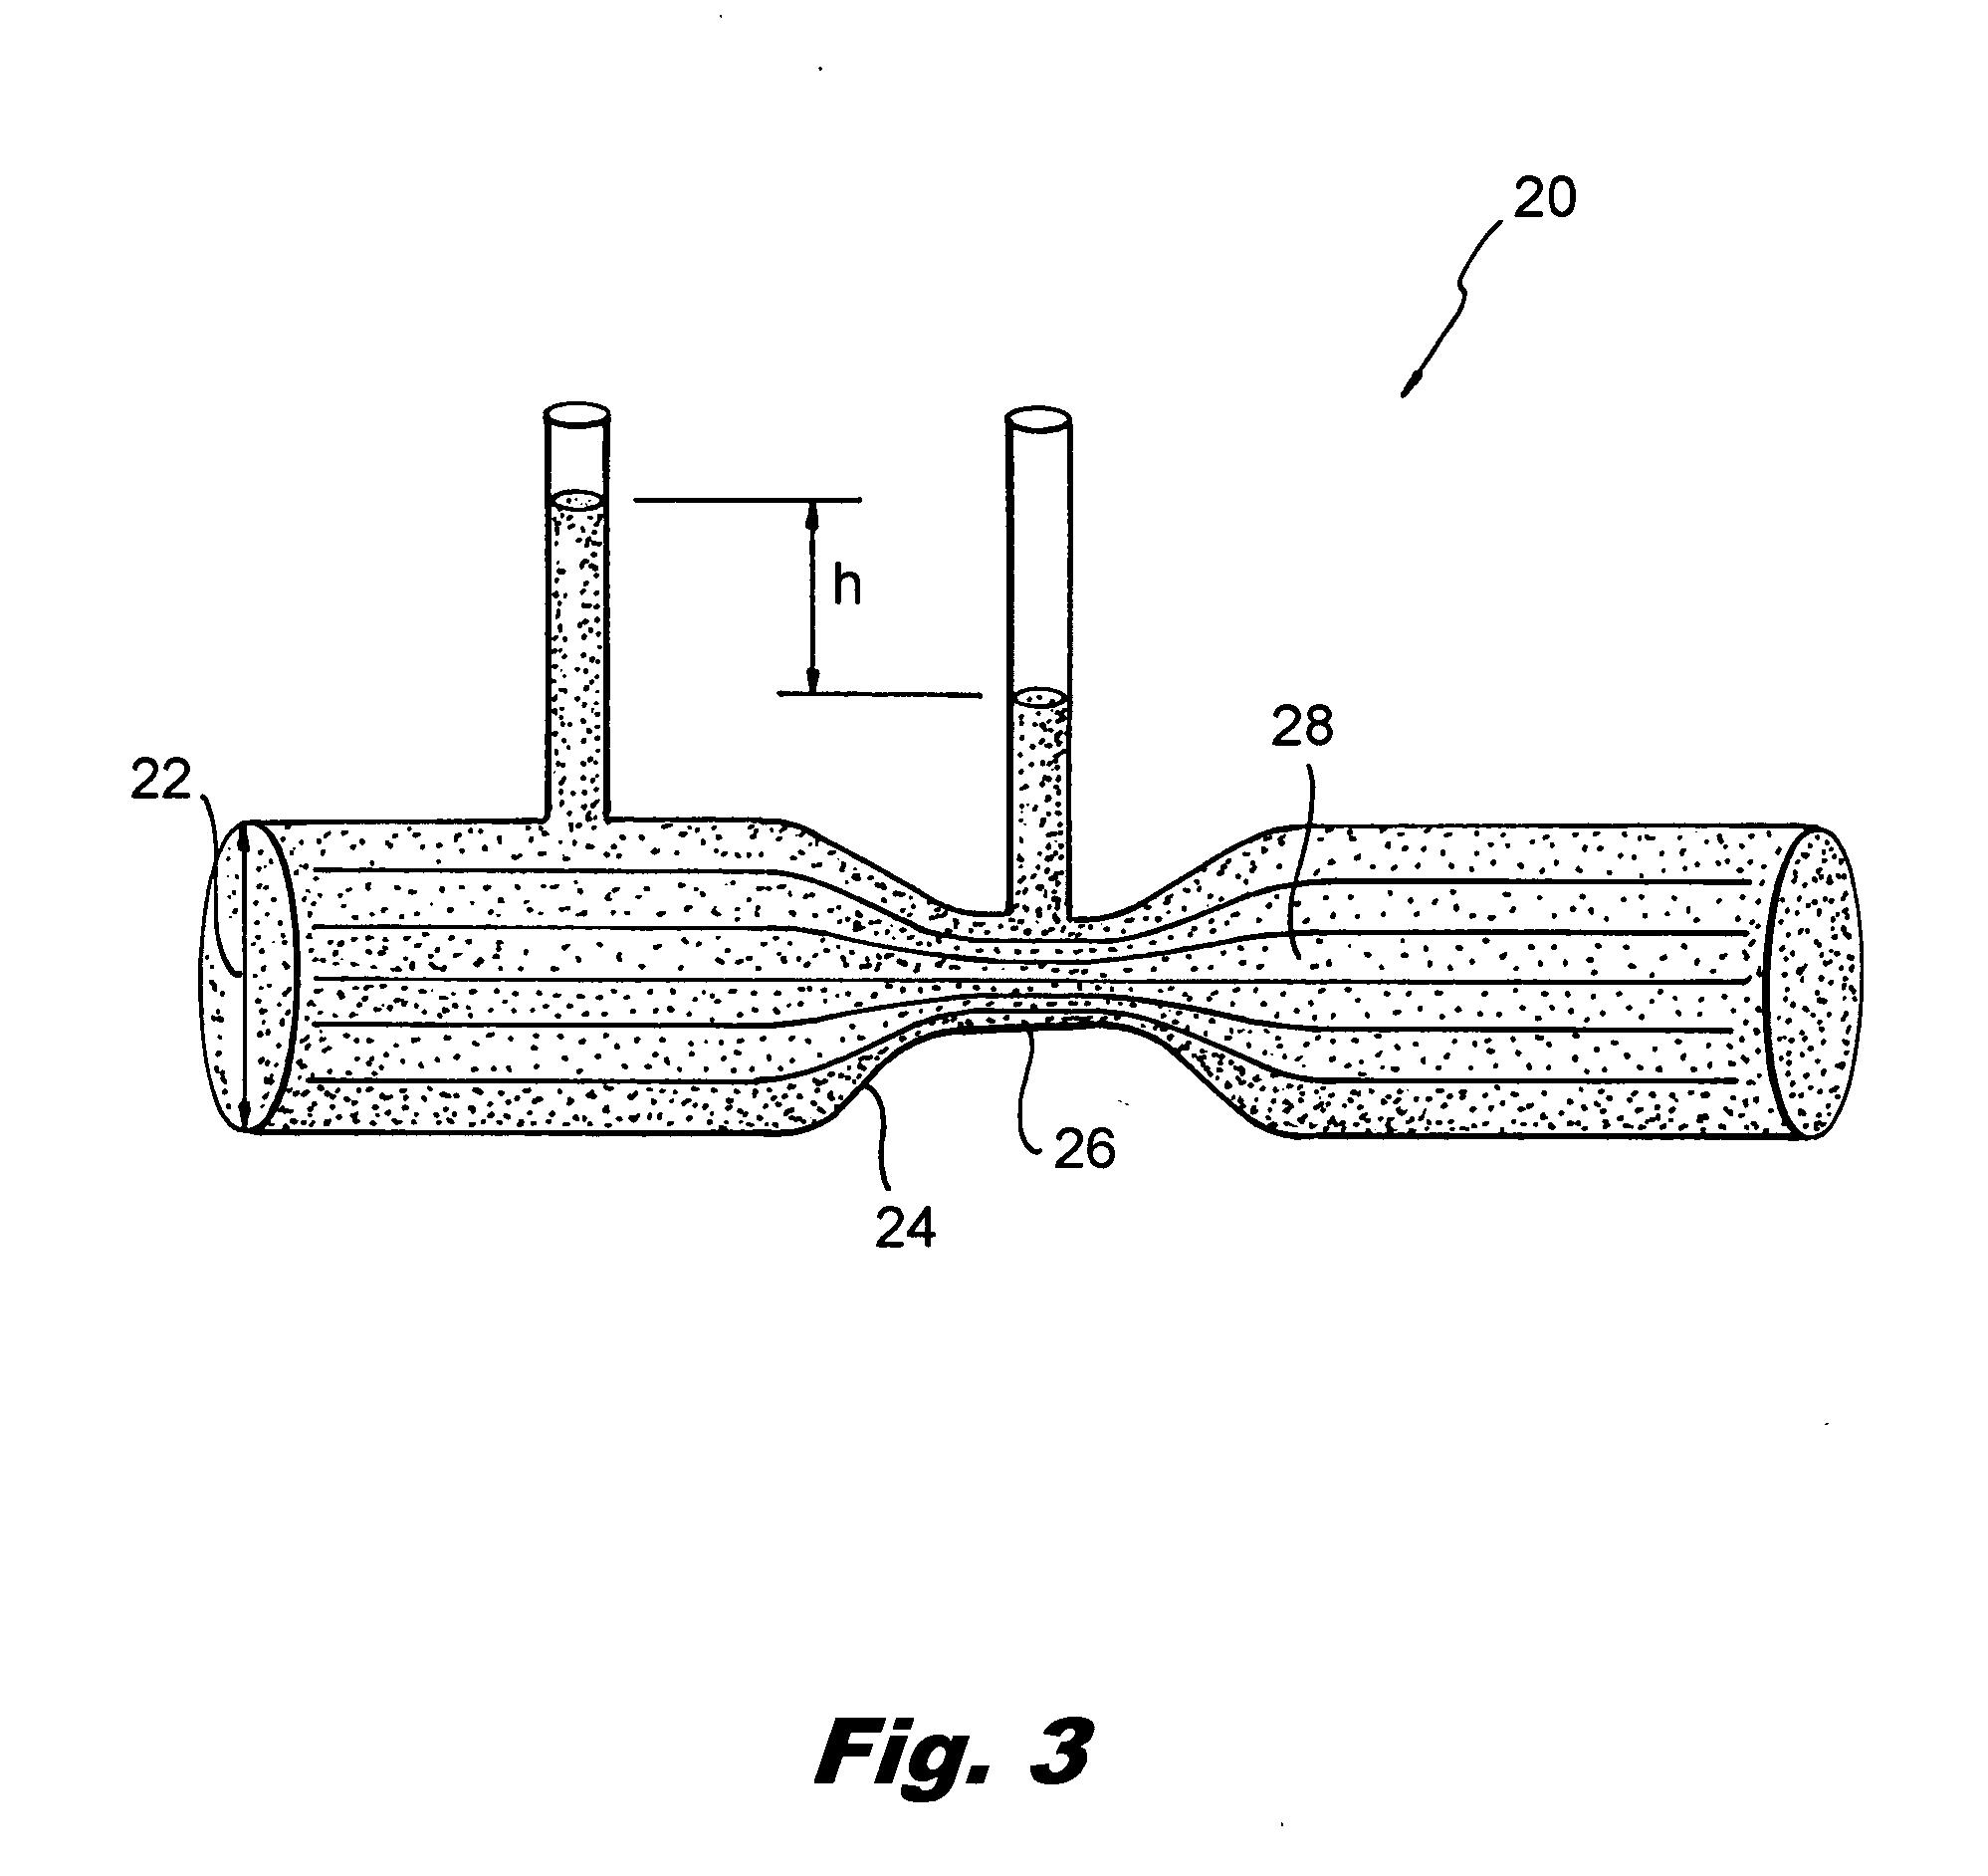 System and method for creating a venturi effect within an orifice